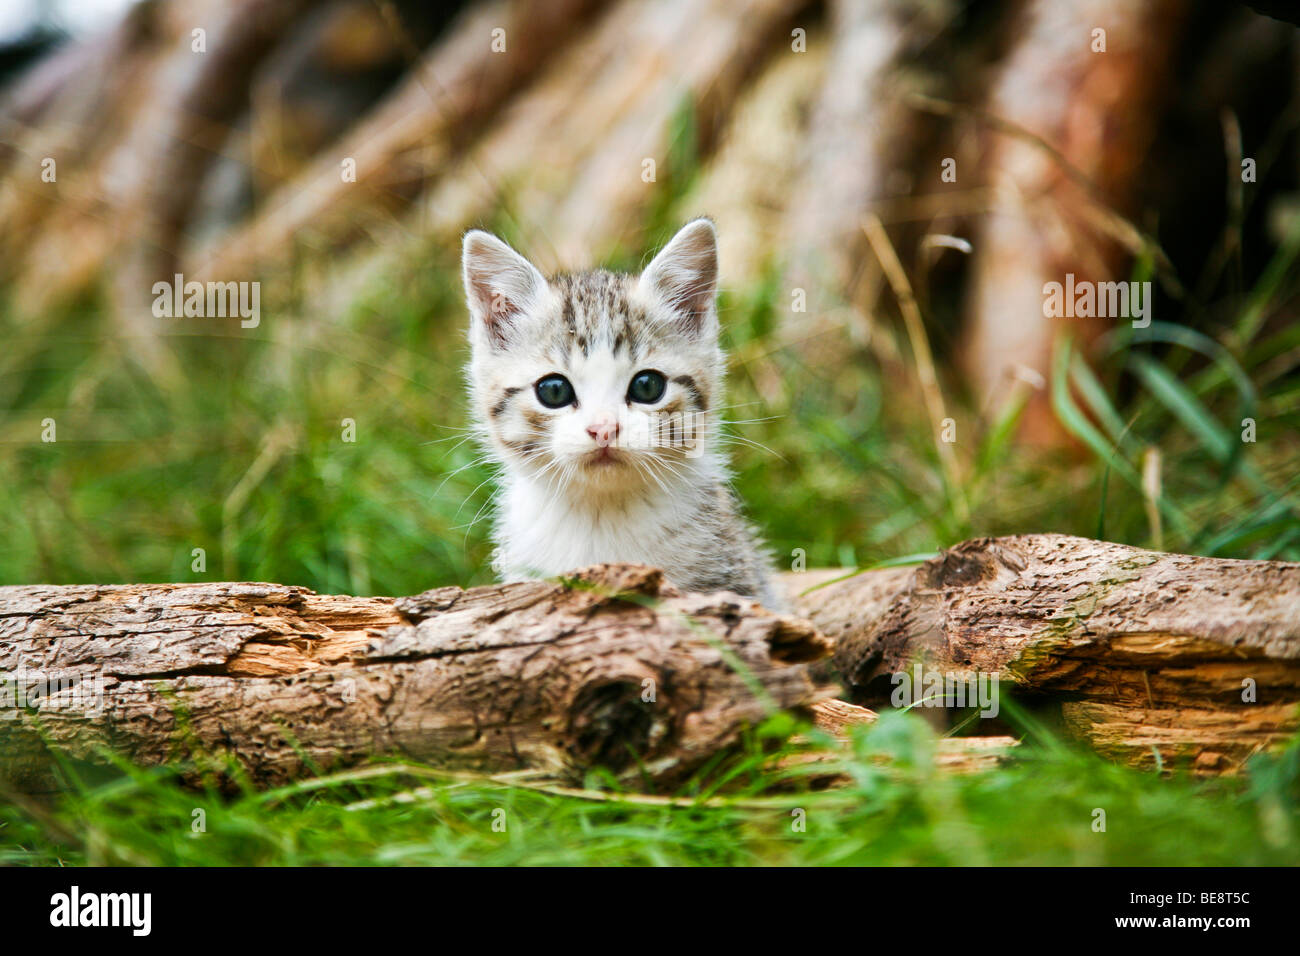 Domestic cat, kitten sitting behind a branch Stock Photo